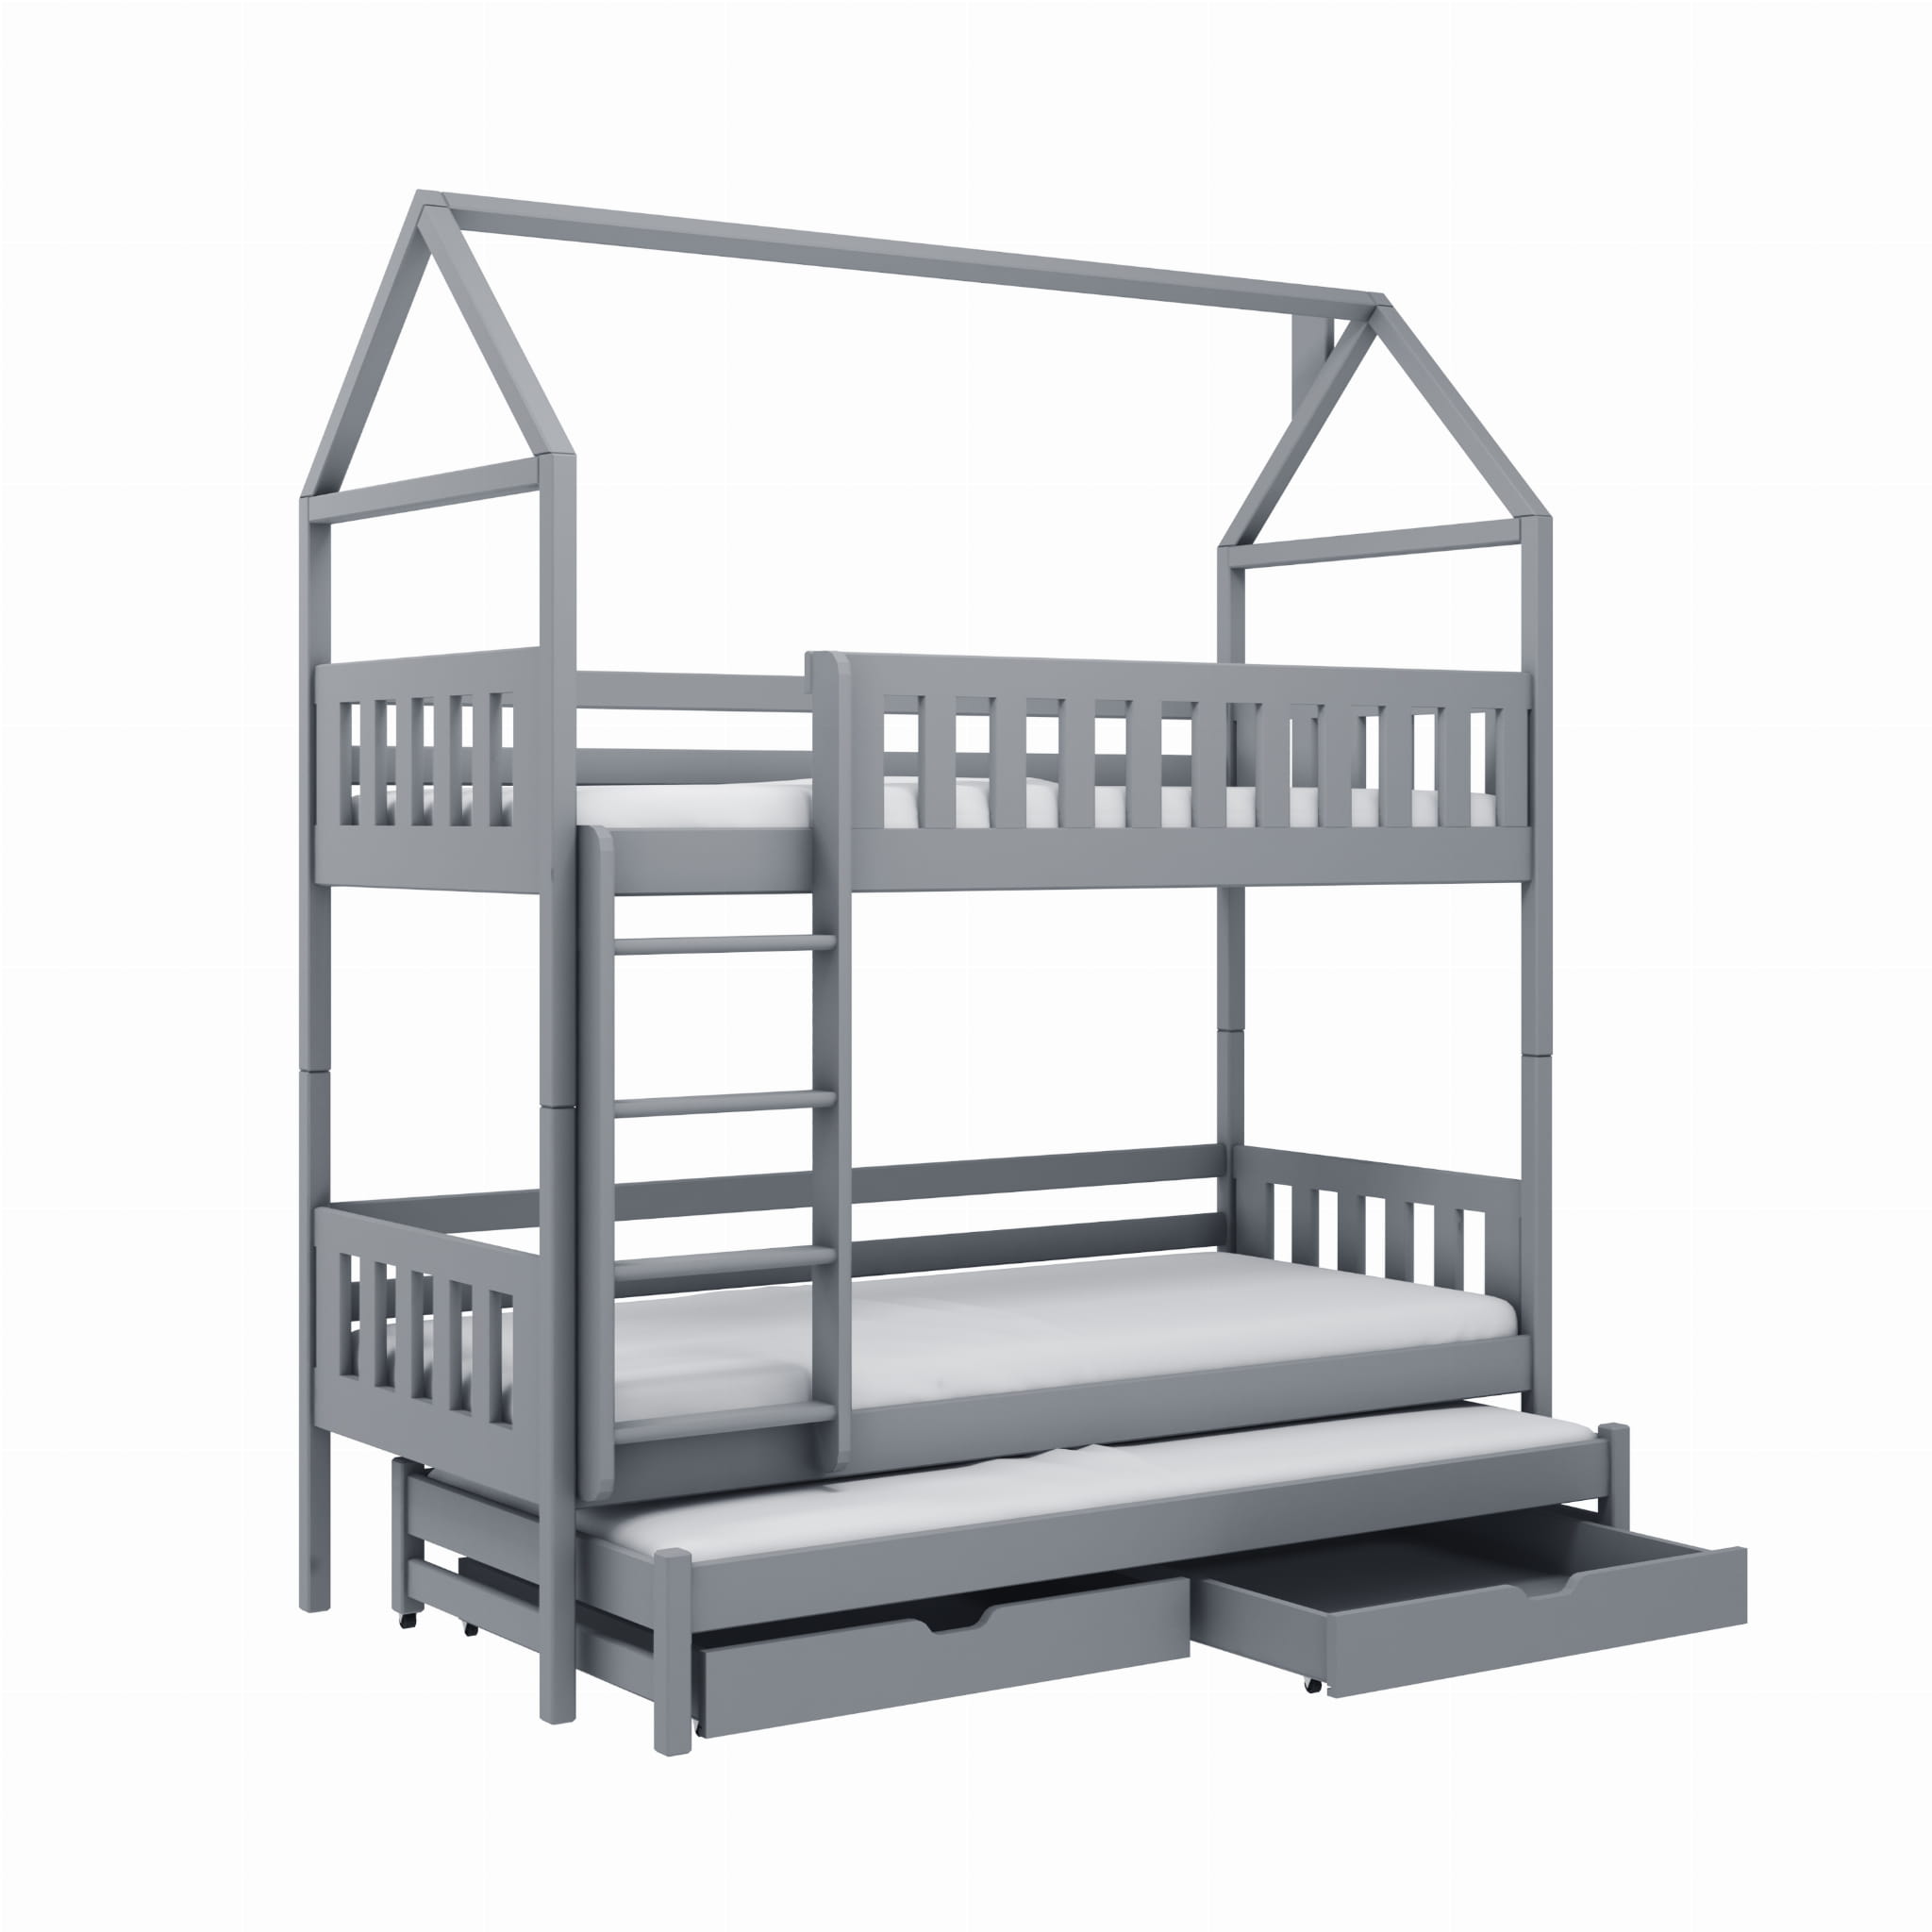 House bed bunk bed with three beds Ingvar House bed bunk bed with three beds Ingvar